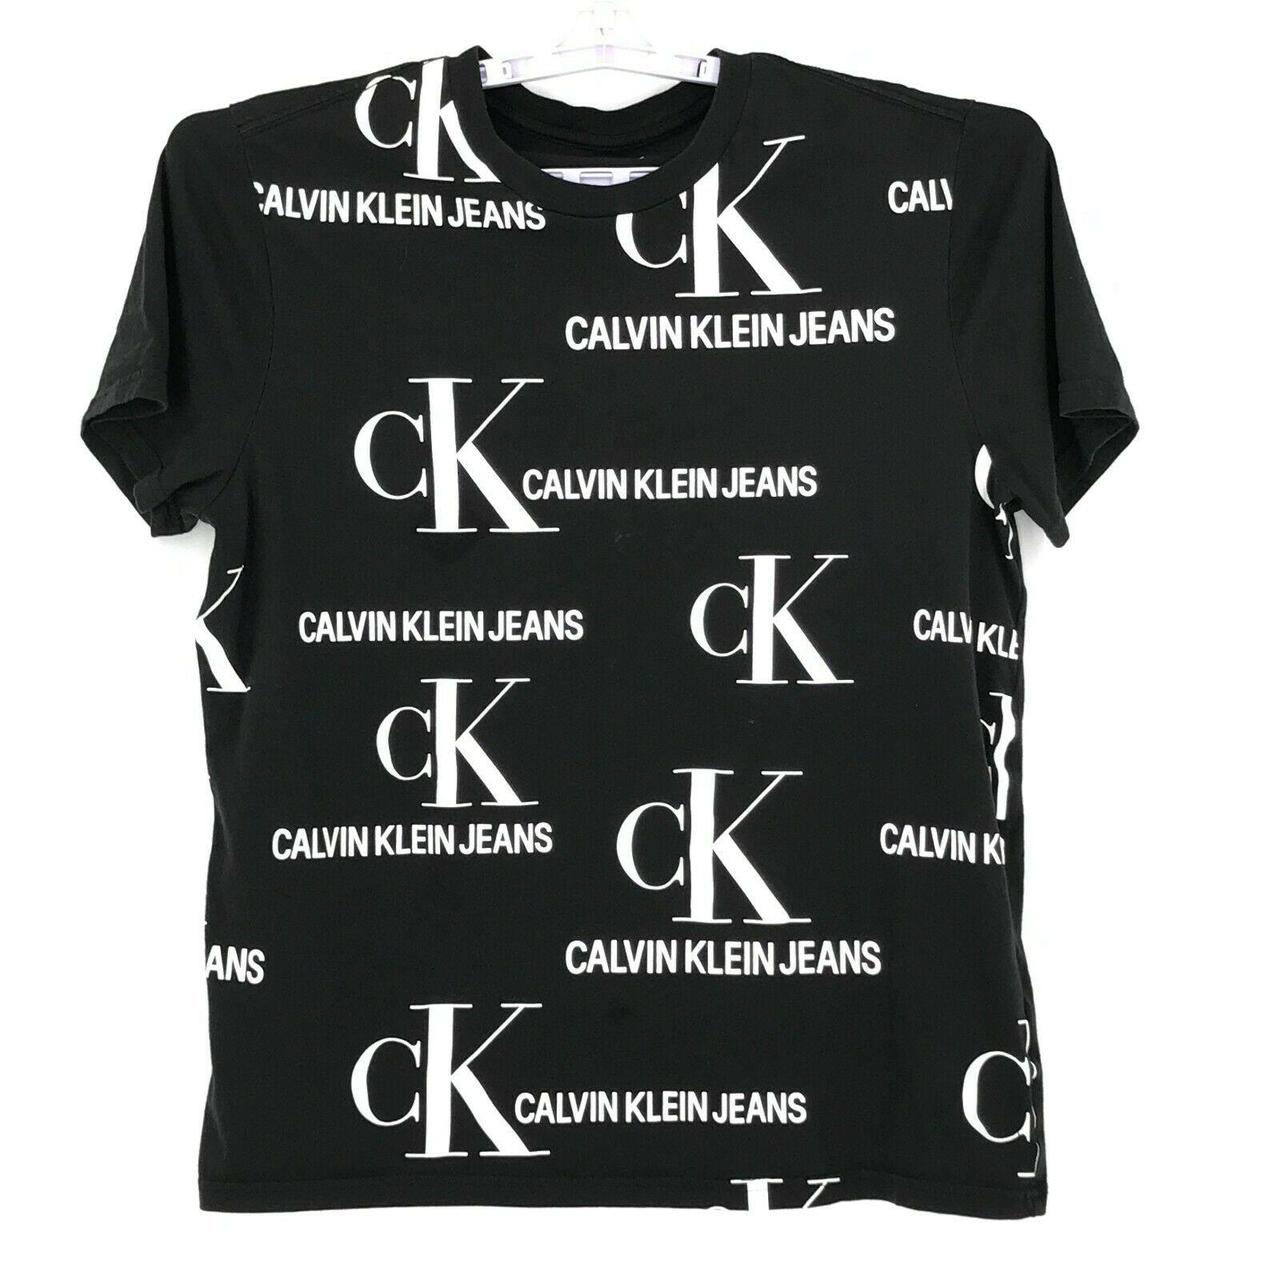 Product Image 1 - Calvin Klein Jeans T-Shirt Adult